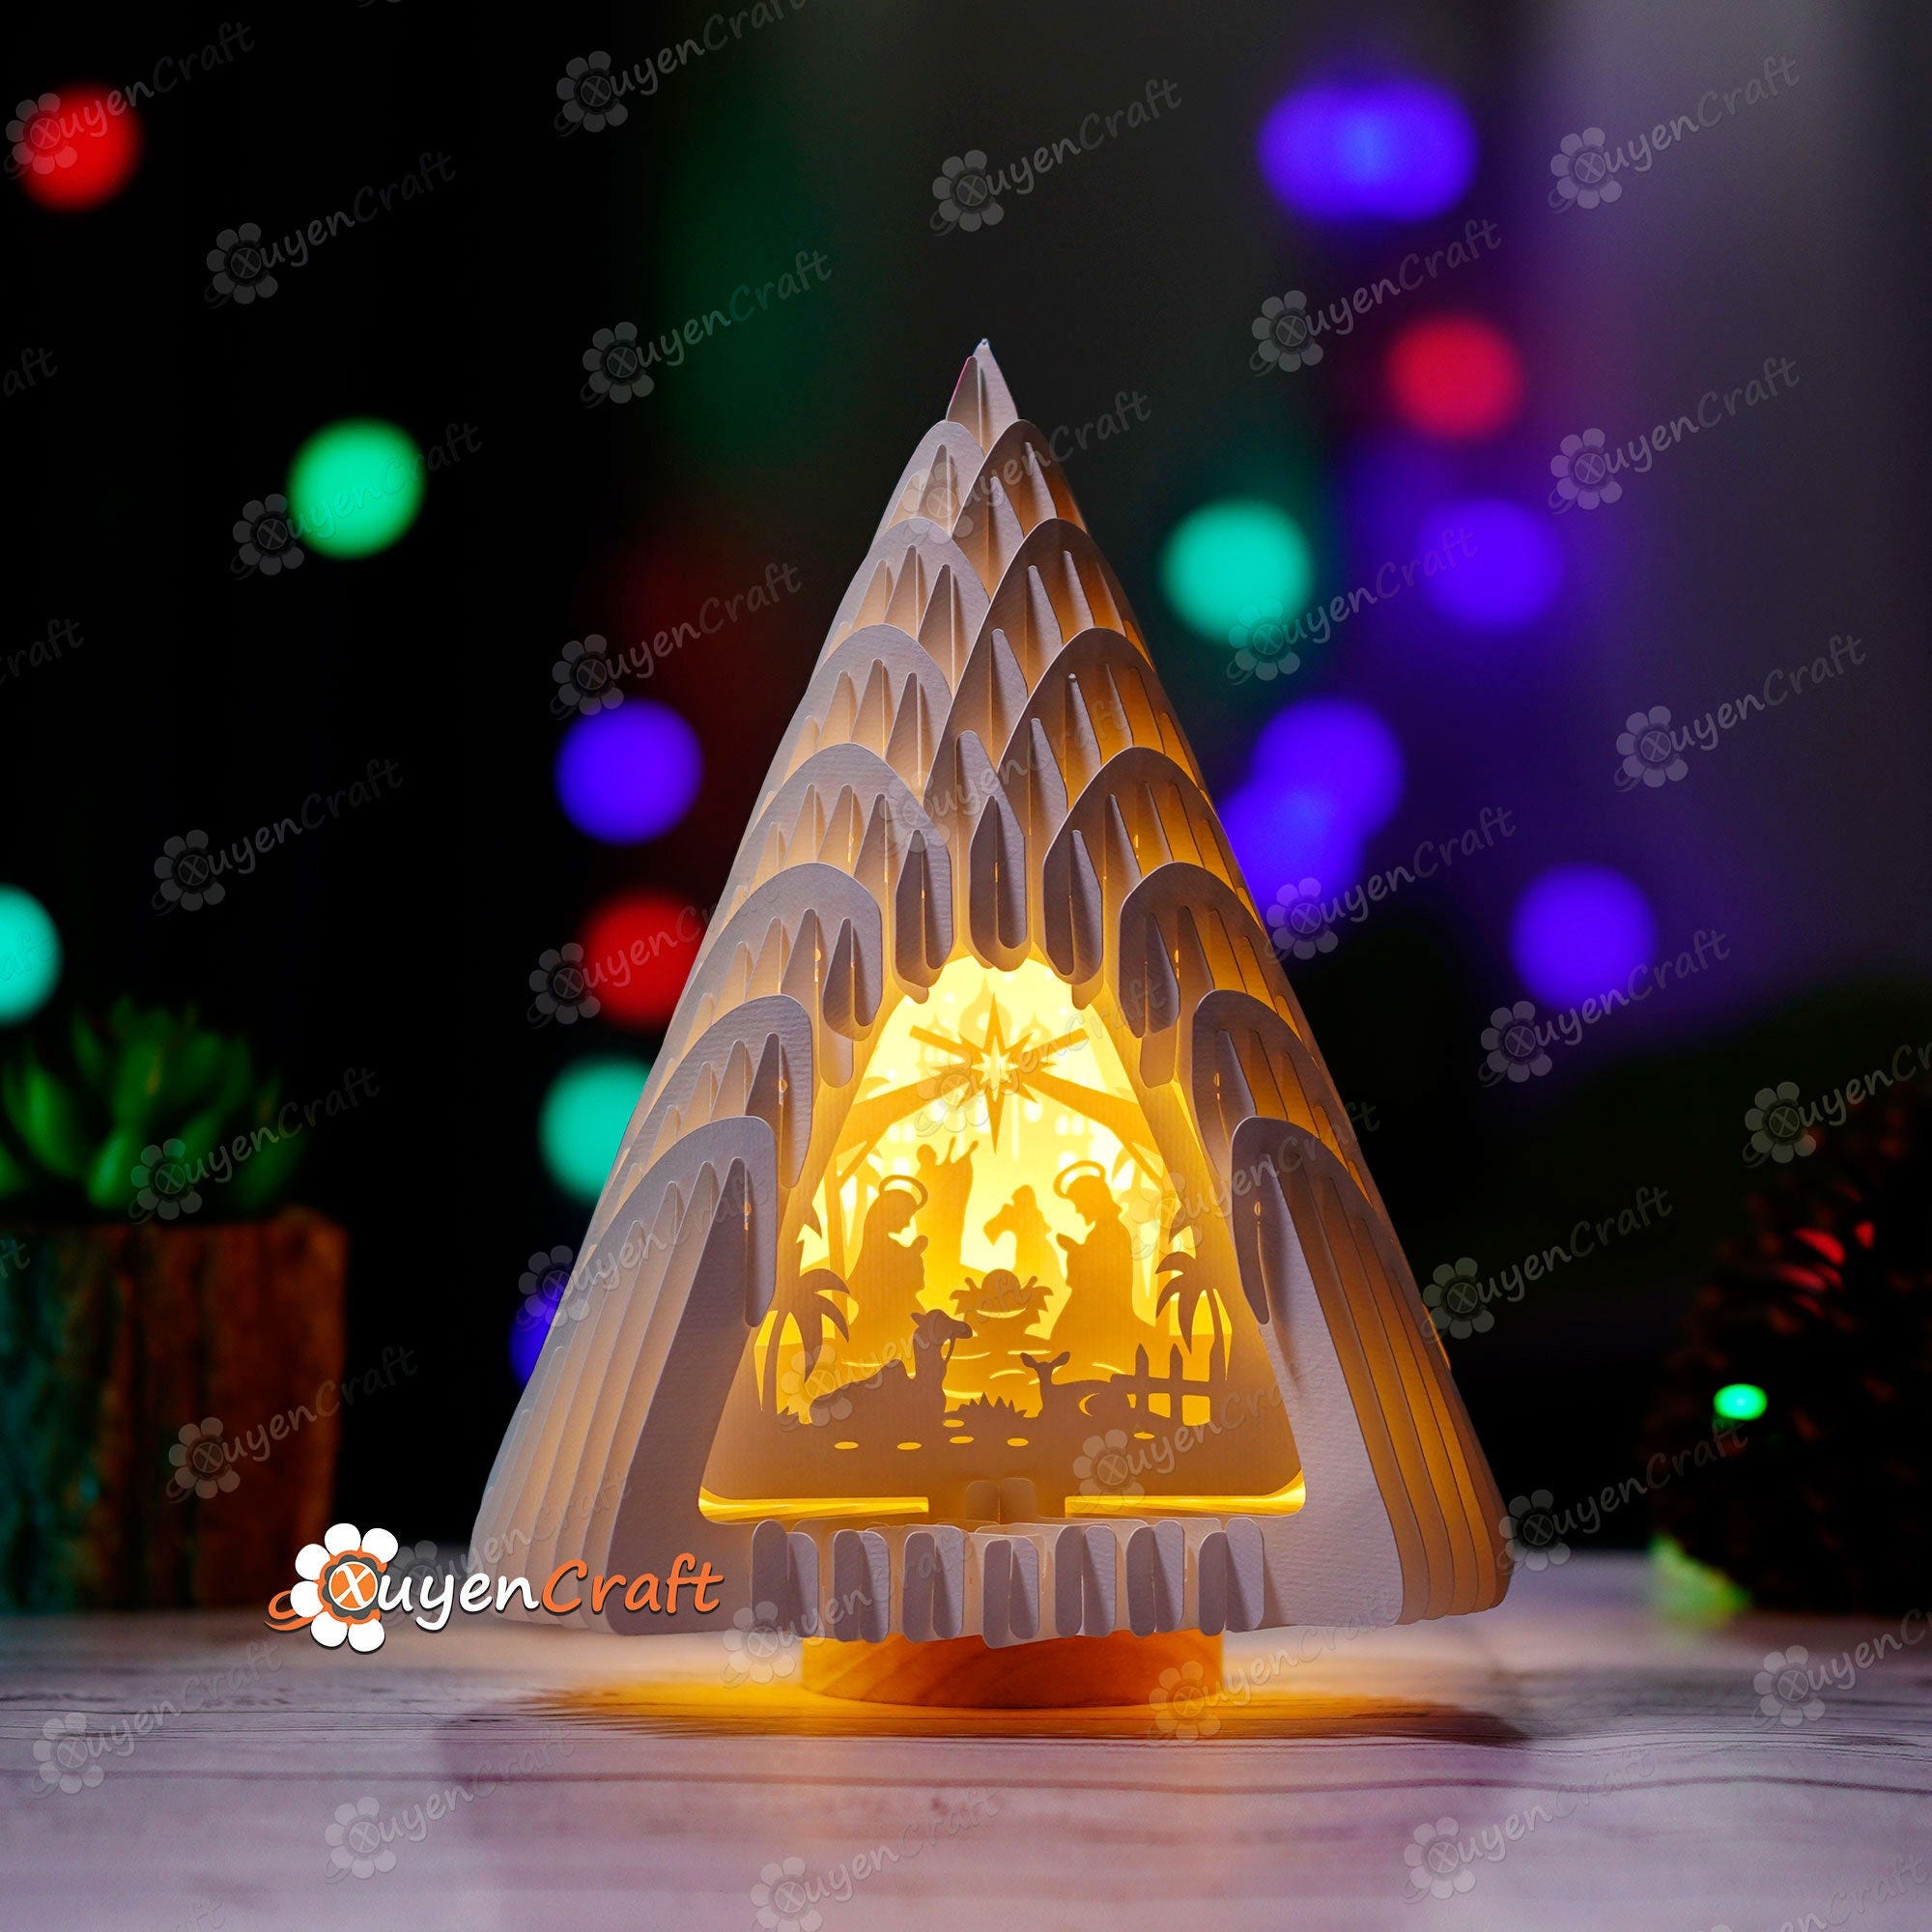 Christmas Tree V2 with Nativity Scene 3D Popup SVG Template, Christmas Tree Lantern 3D Shadow Box for Merry Christmas Lightbox Paper Cutting